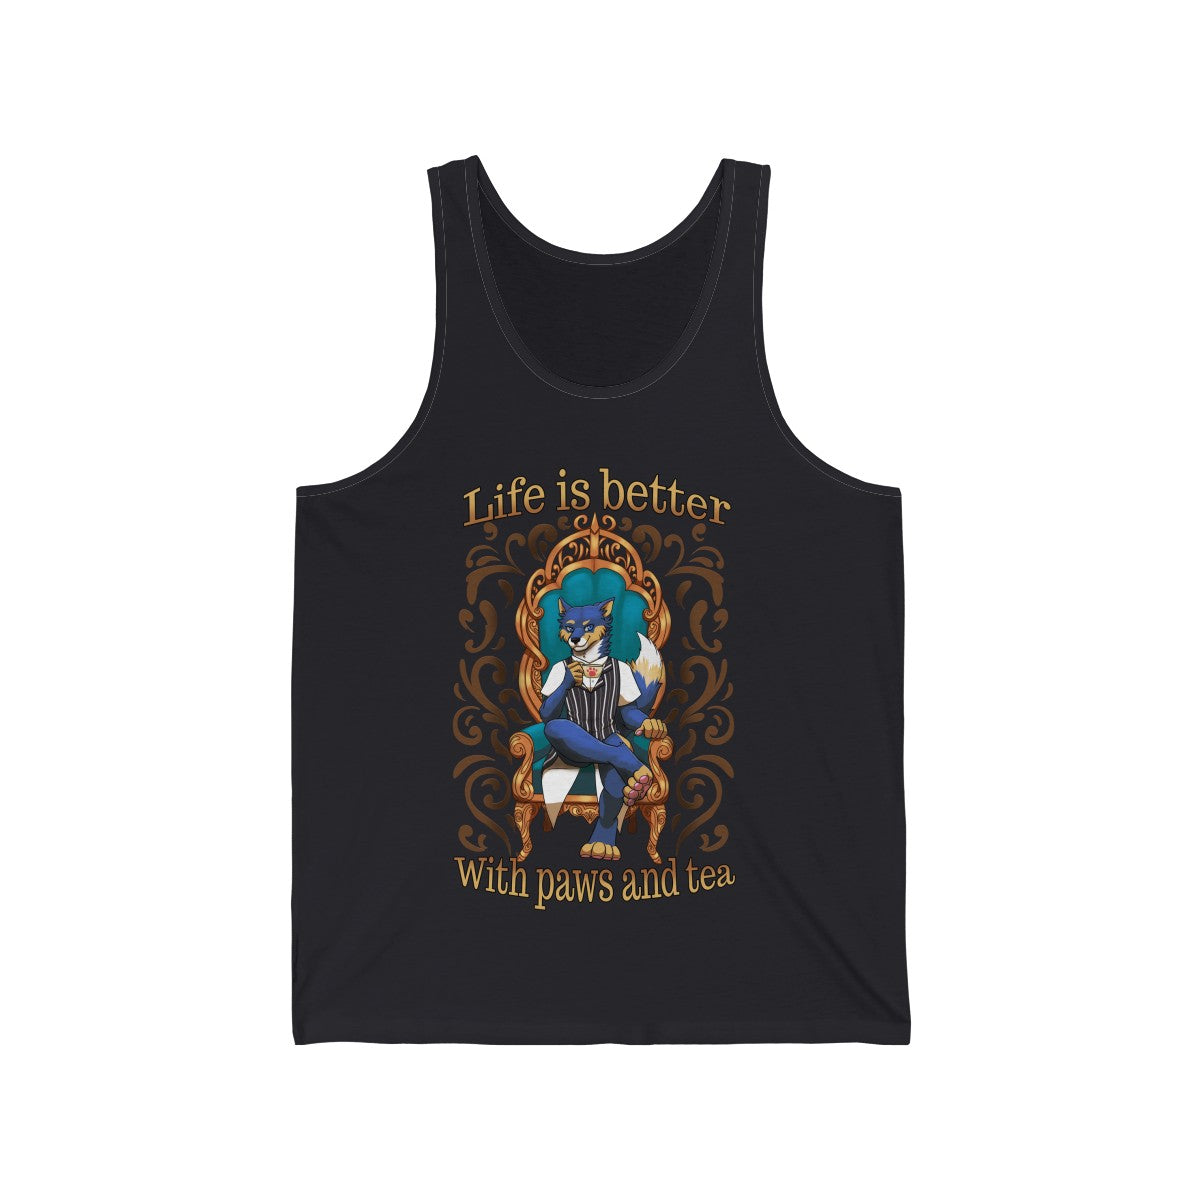 Life is better with Paws and Tea - Tank Top Tank Top Artemis Wishfoot Dark Grey XS 